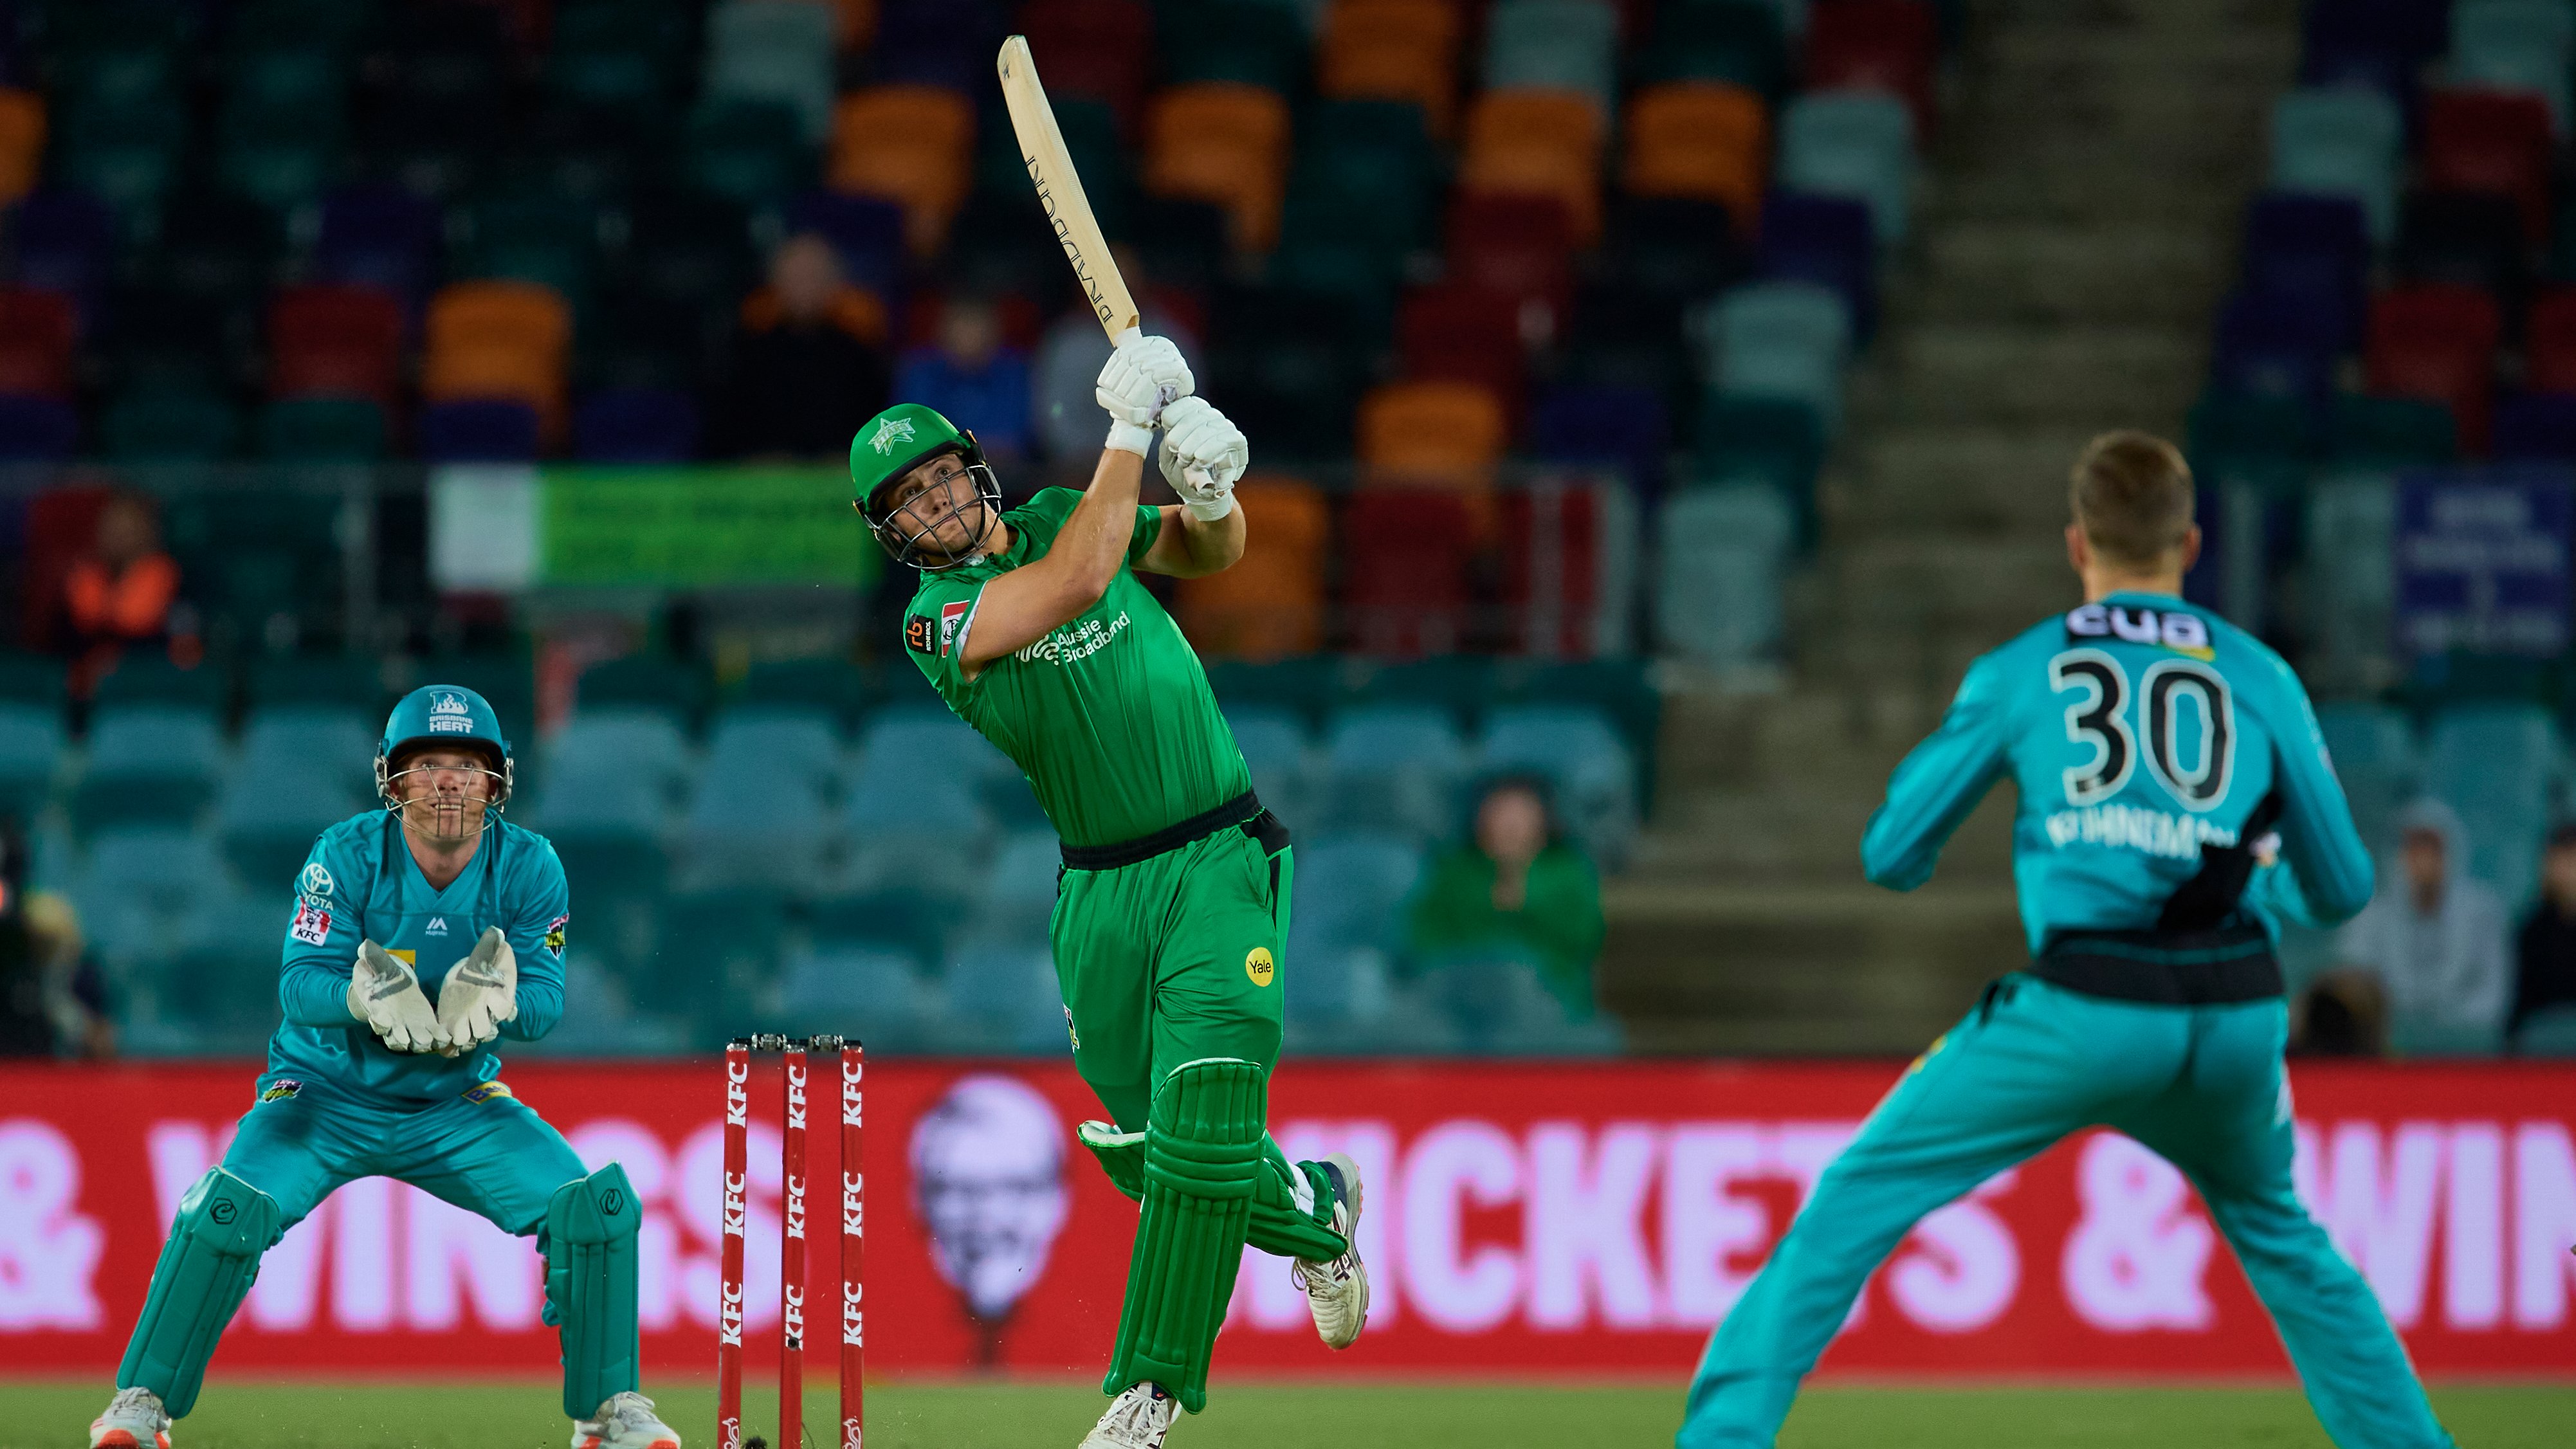 BBL10 | MLS vs BRH: Coulter-Nile and Cartwright shine as Heat get decimated by Stars